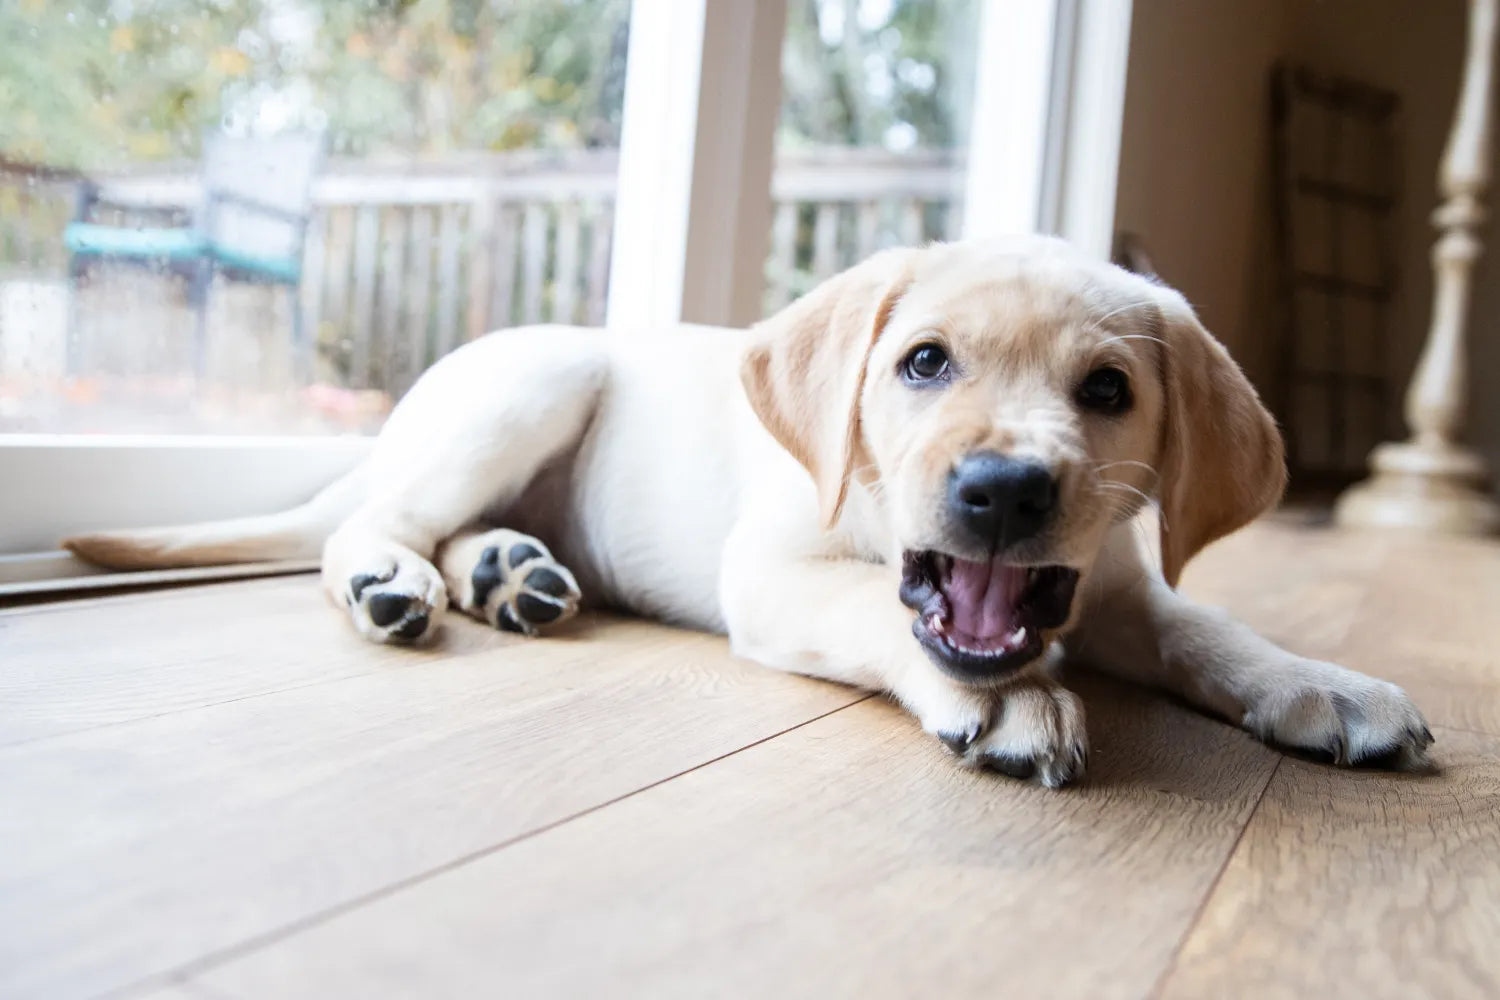 How To Stop a Puppy From Barking: 5 Tips